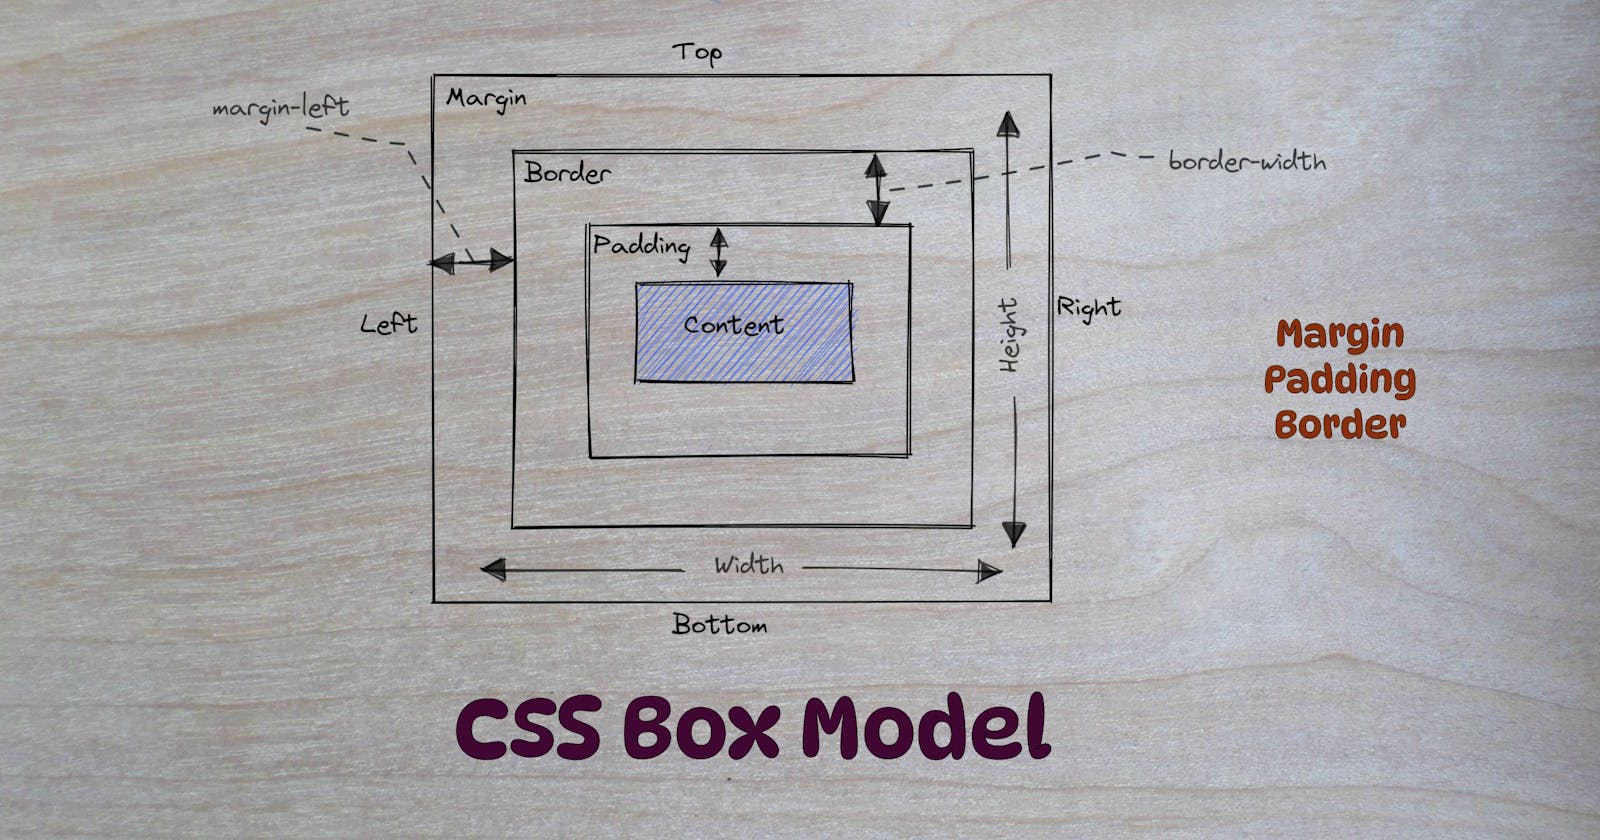 Easy way to understand CSS Box Model...